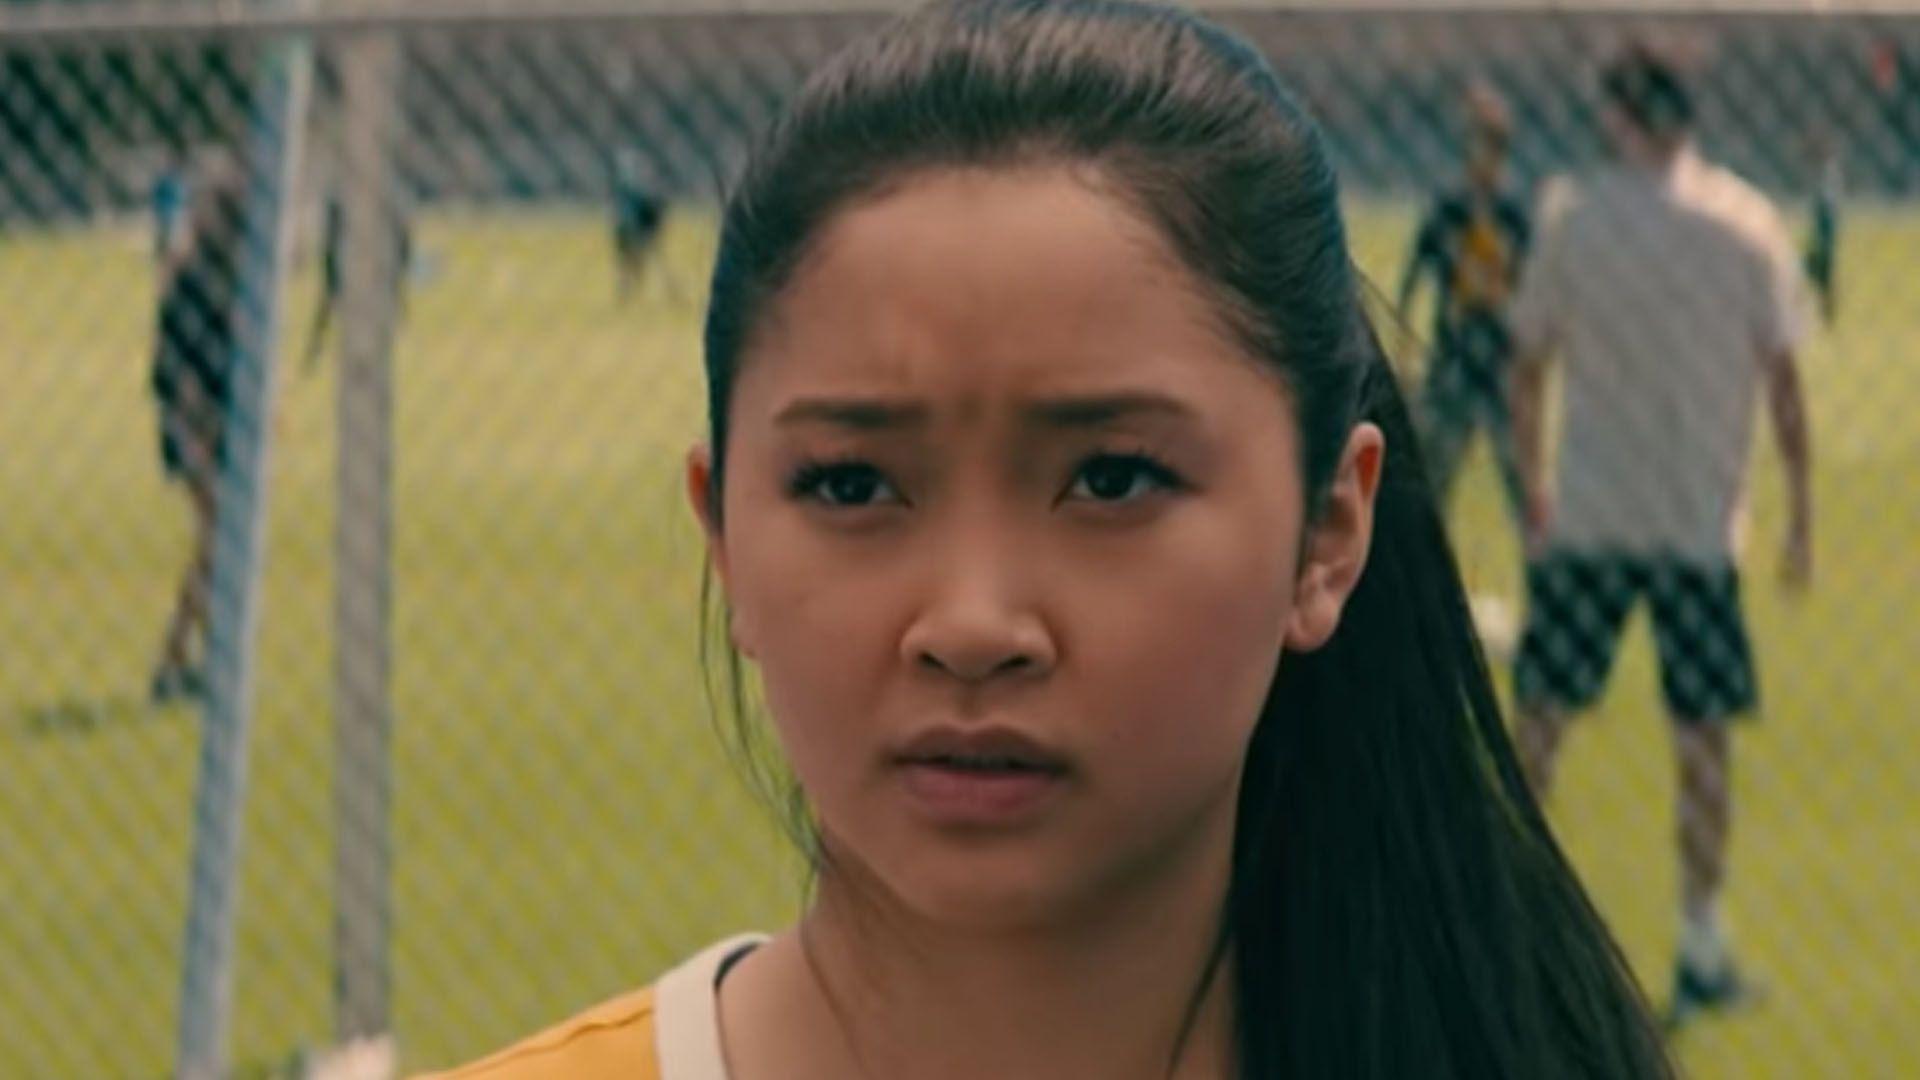 WATCH: For “To All The Boys I've Loved Before”